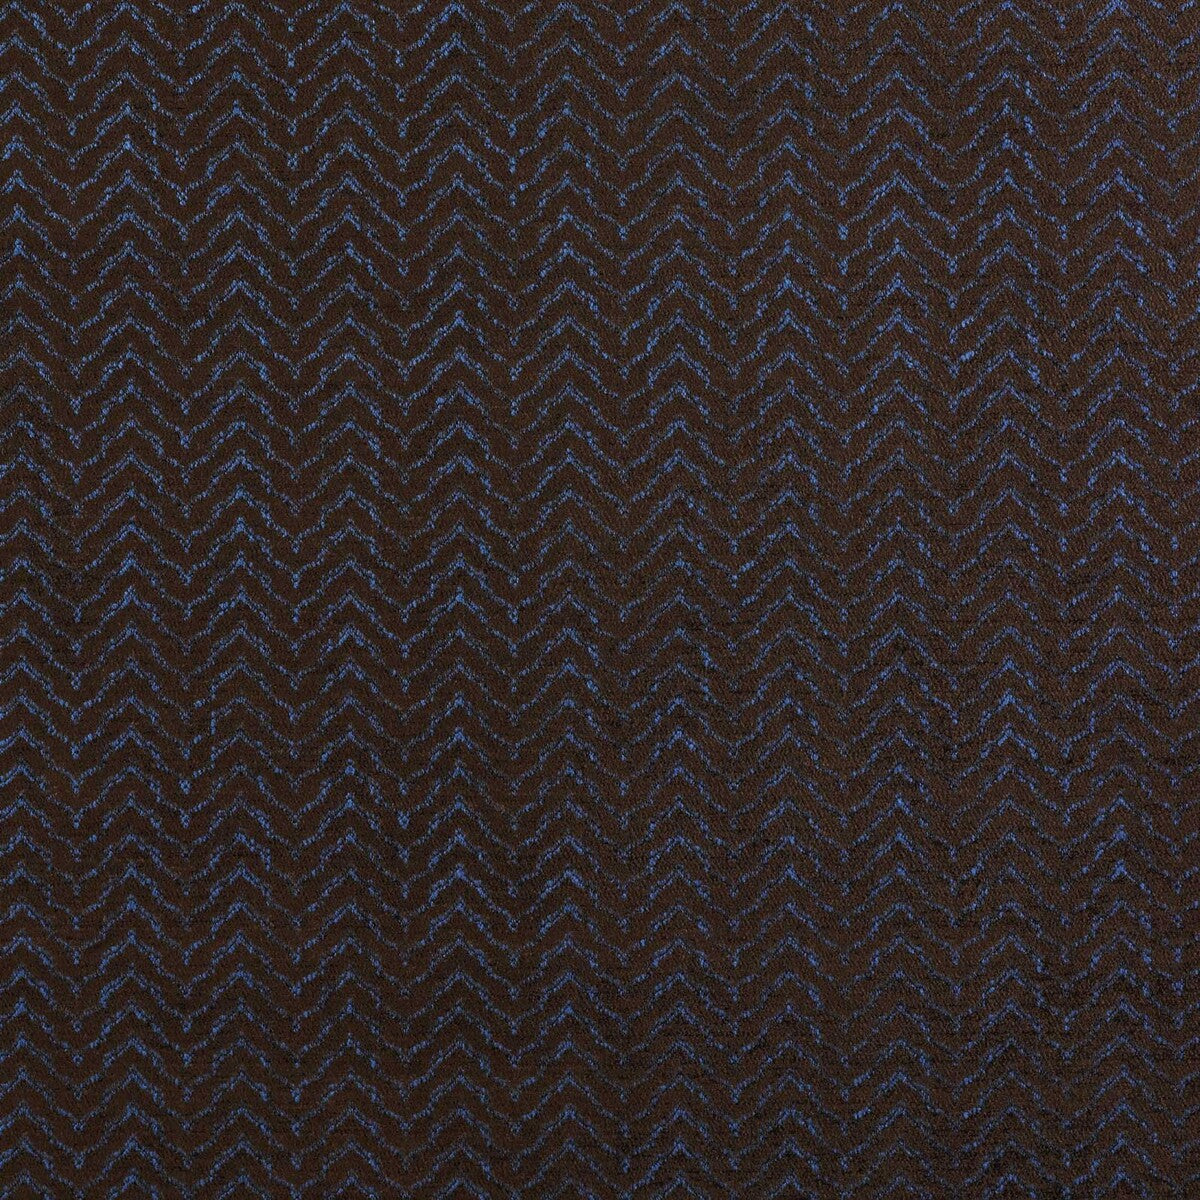 Sella fabric in azul/chocola color - pattern GDT5180.002.0 - by Gaston y Daniela in the Lorenzo Castillo II collection